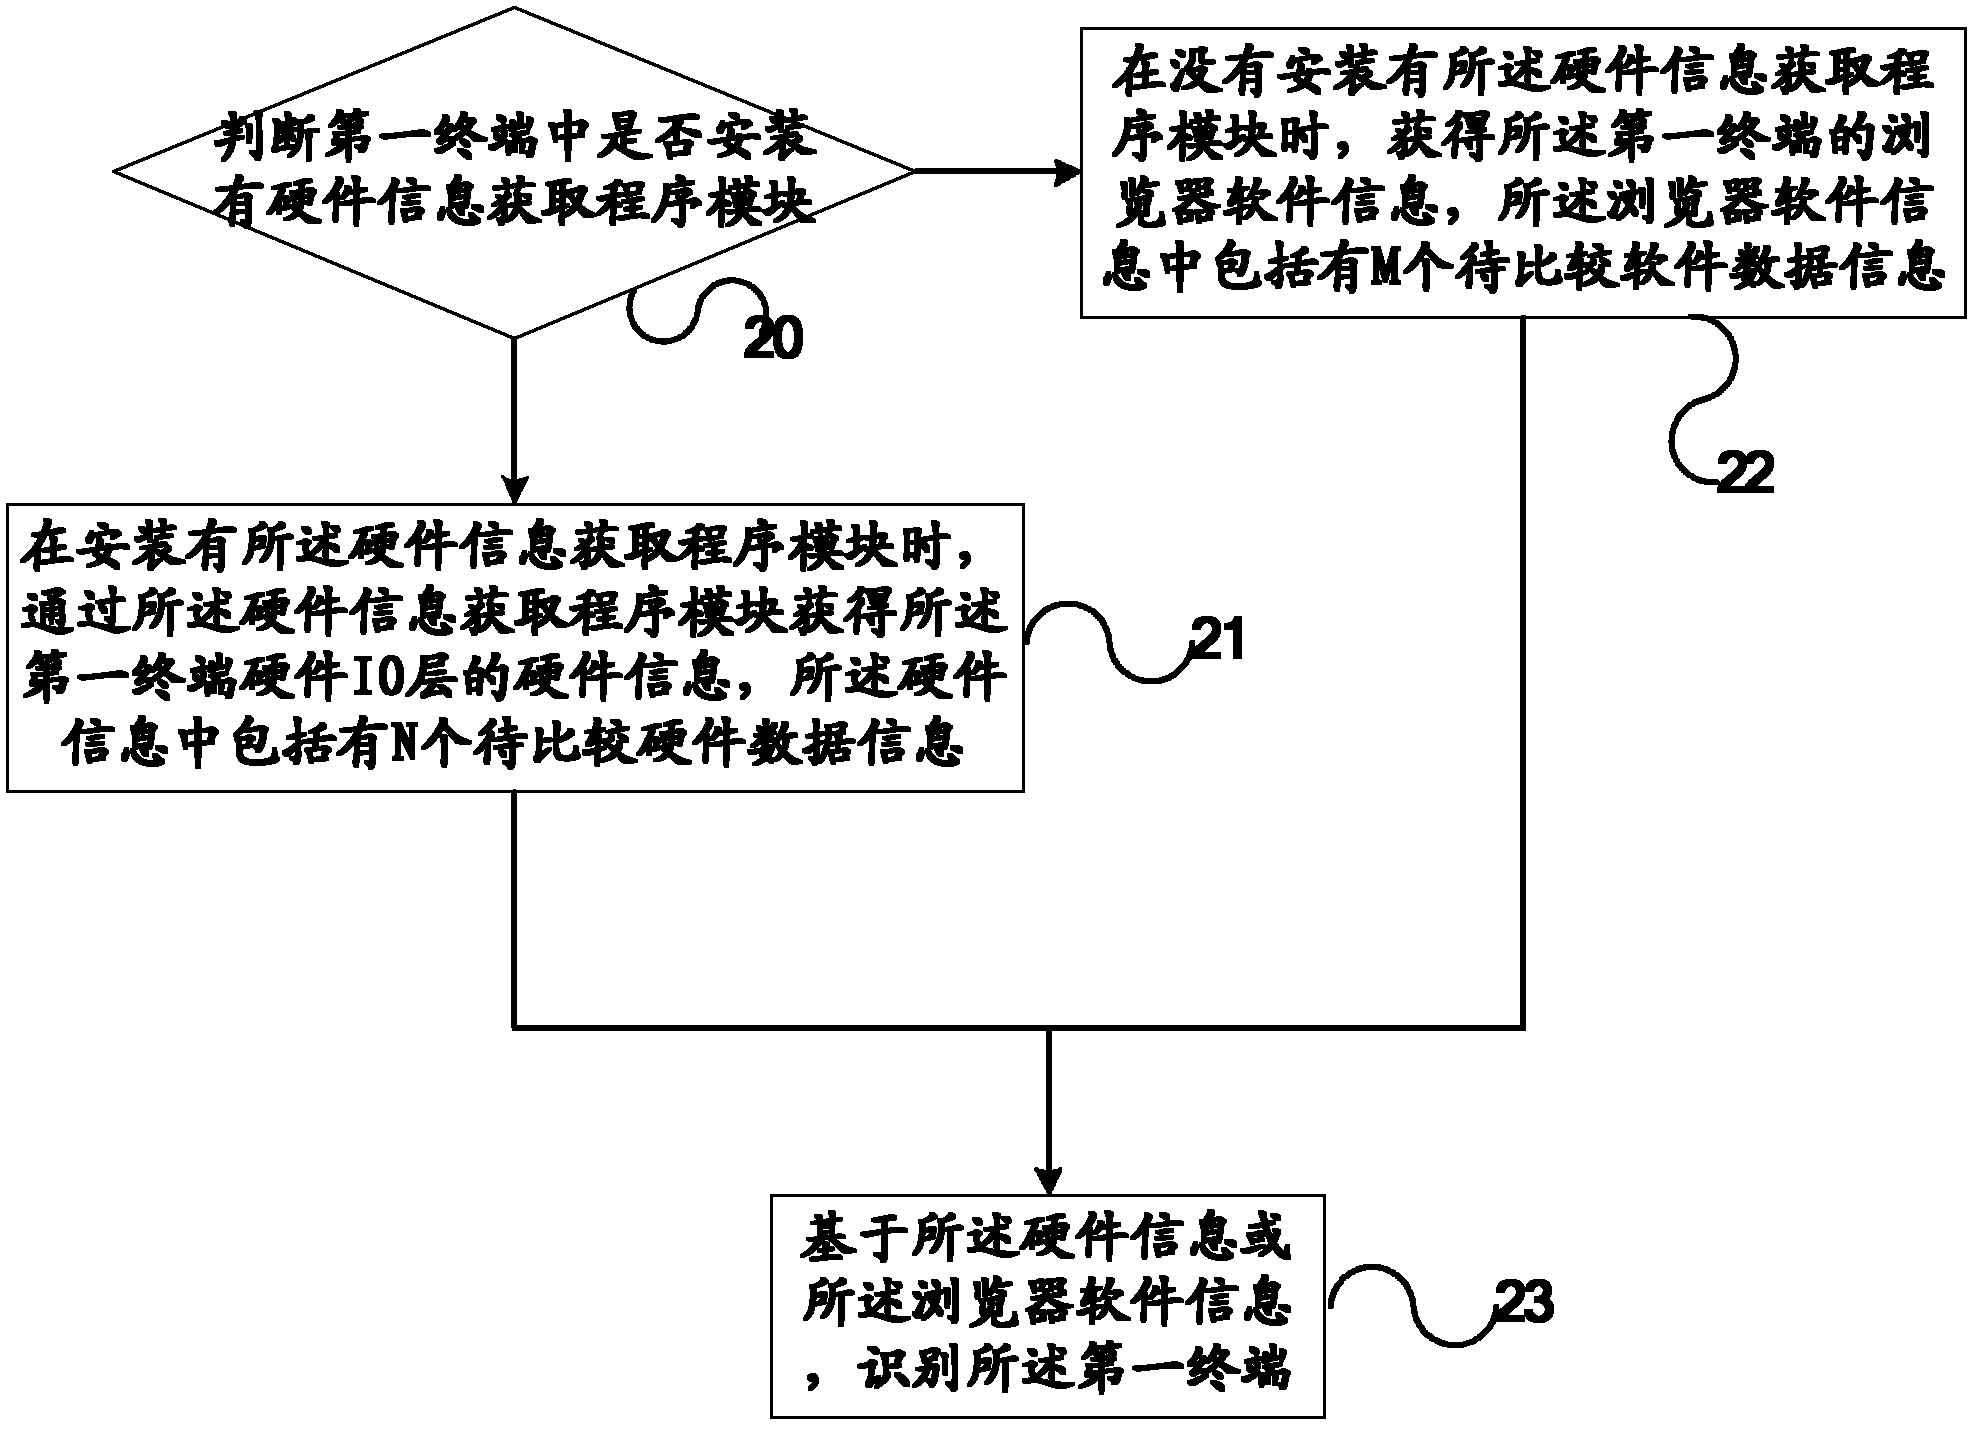 Method and system for identifying user terminal